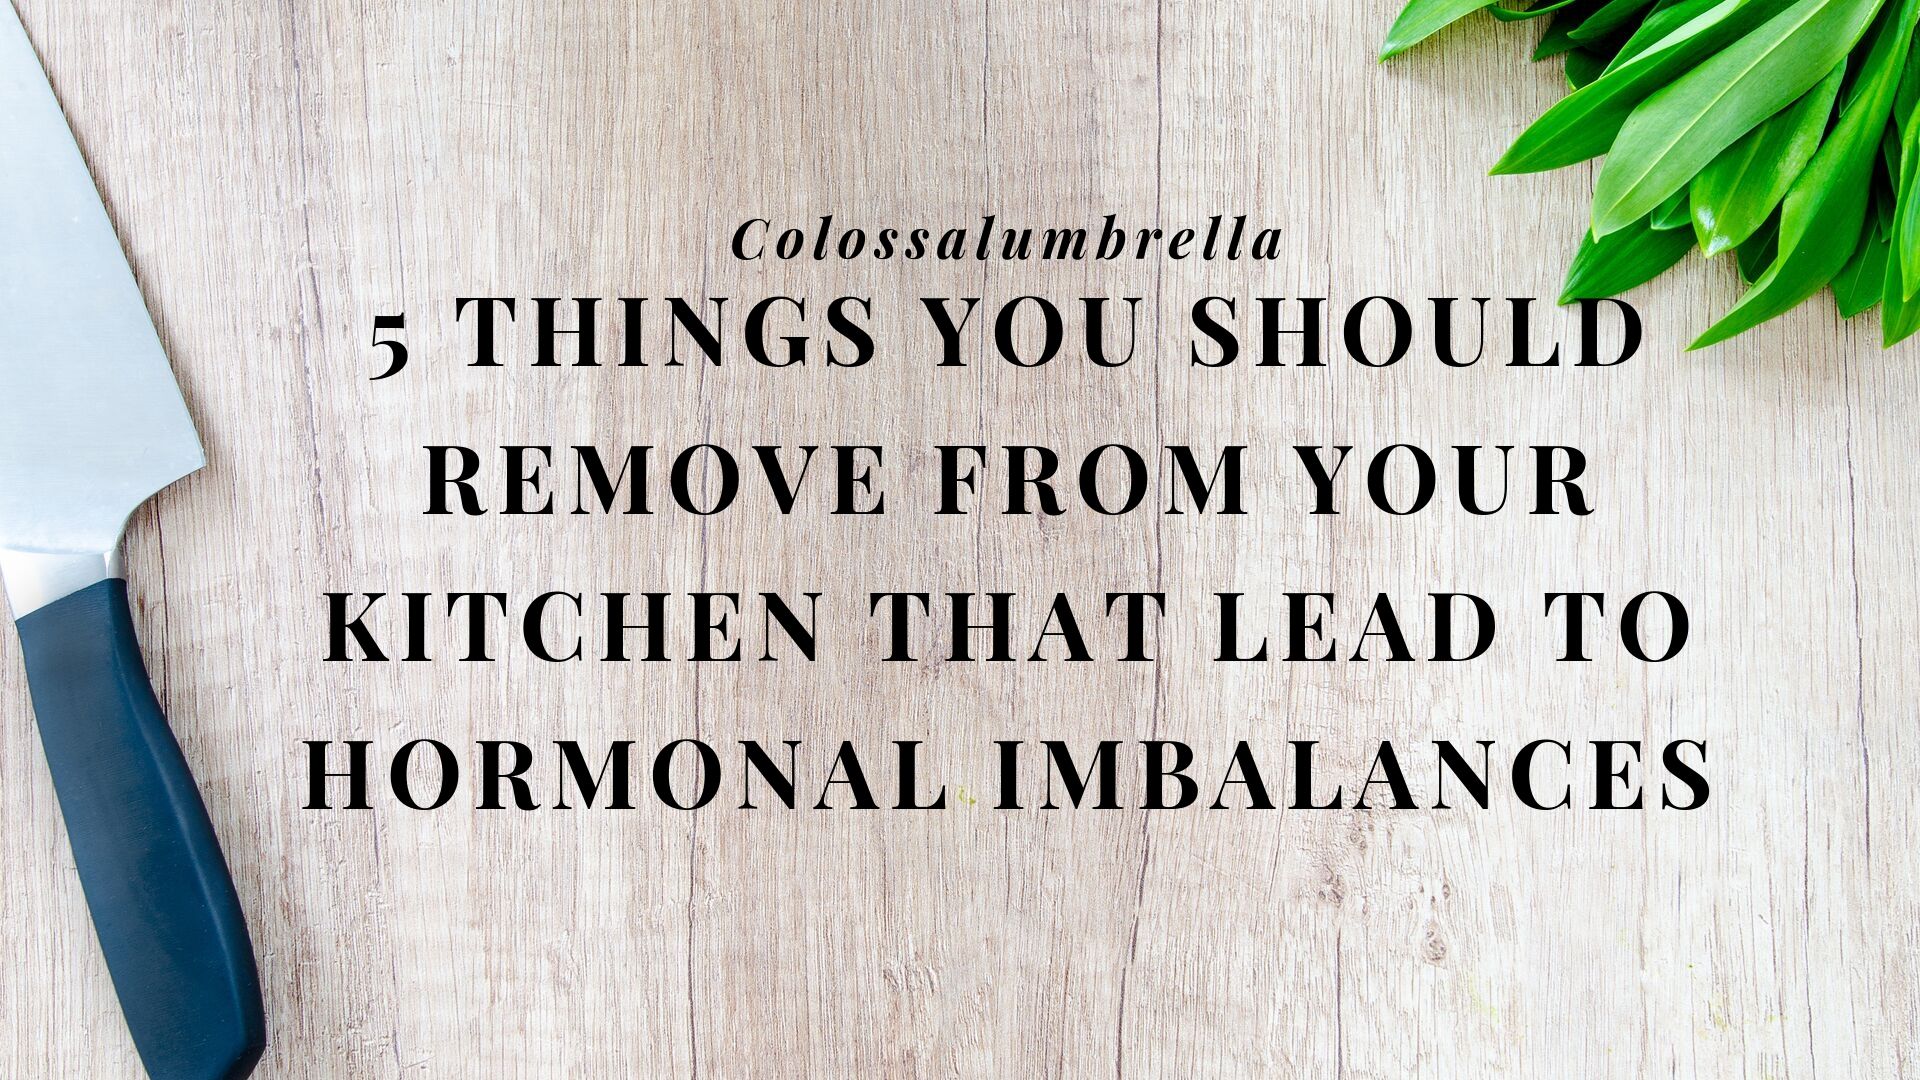 5 things in your kitchen that lead to hormonal imbalances